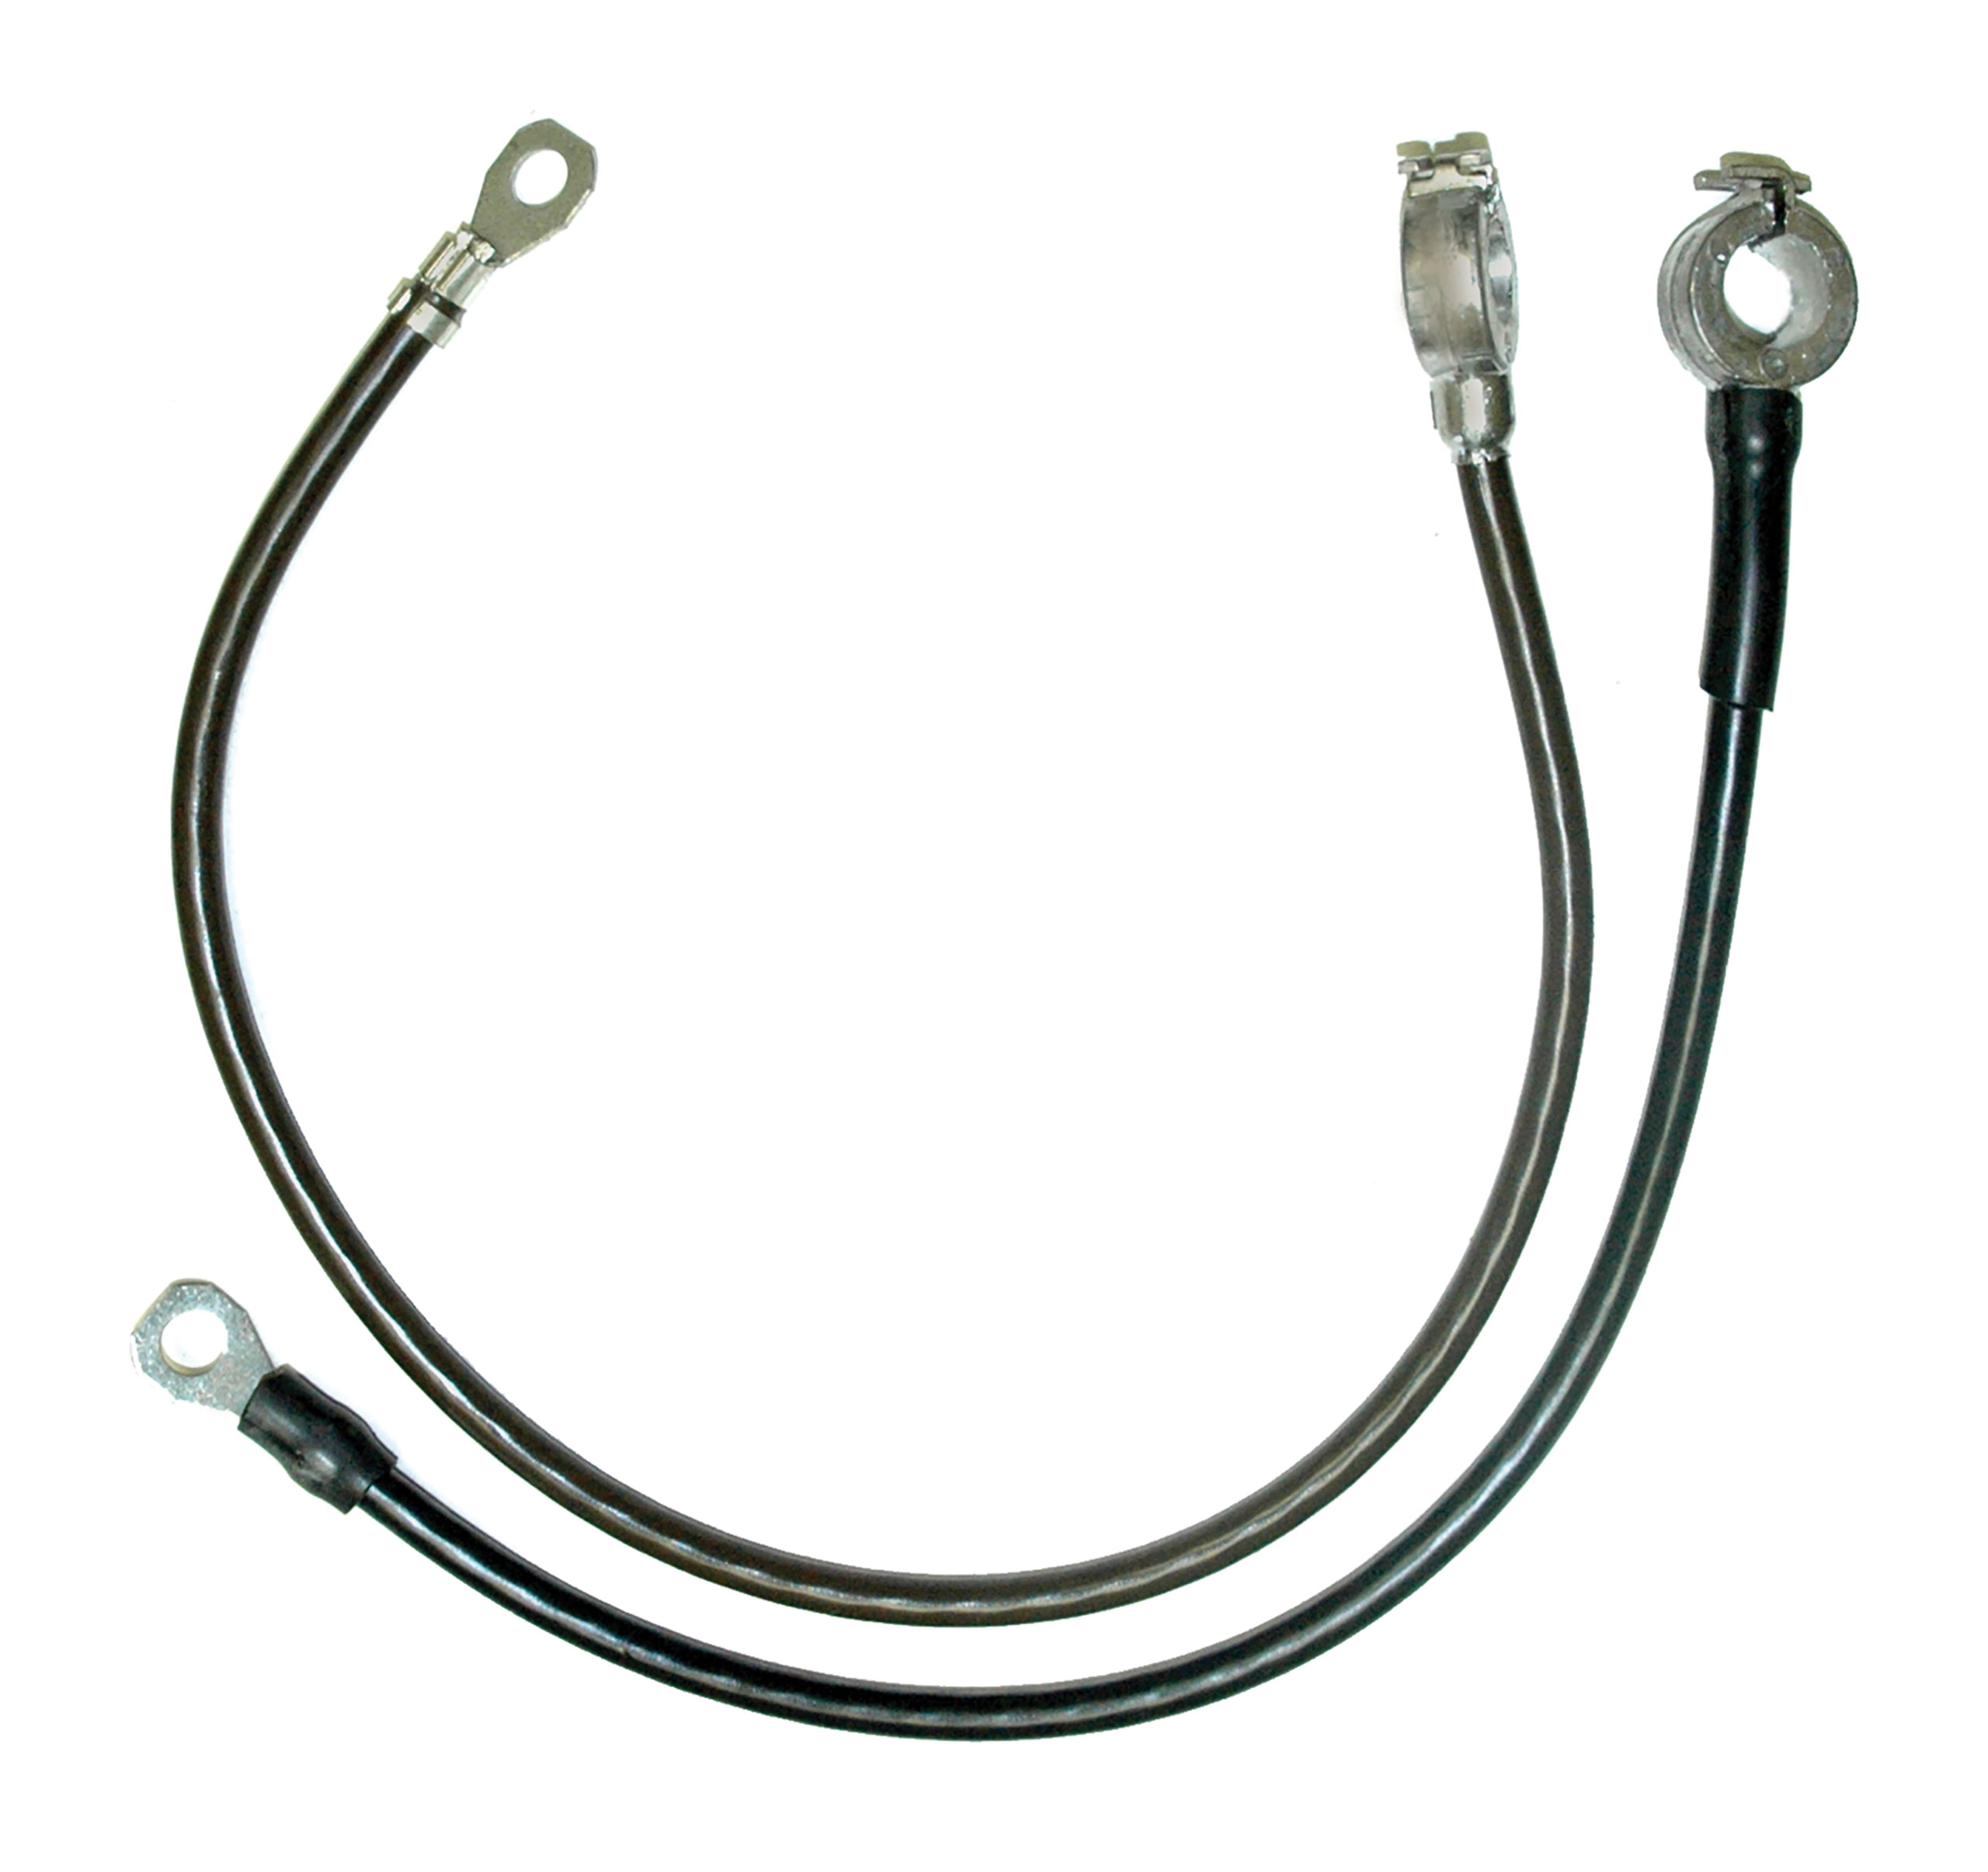 C2 1966-1967 Chevrolet Corvette Battery Cables. 327 W/O Air Conditioning - Lectric Limited, Inc.